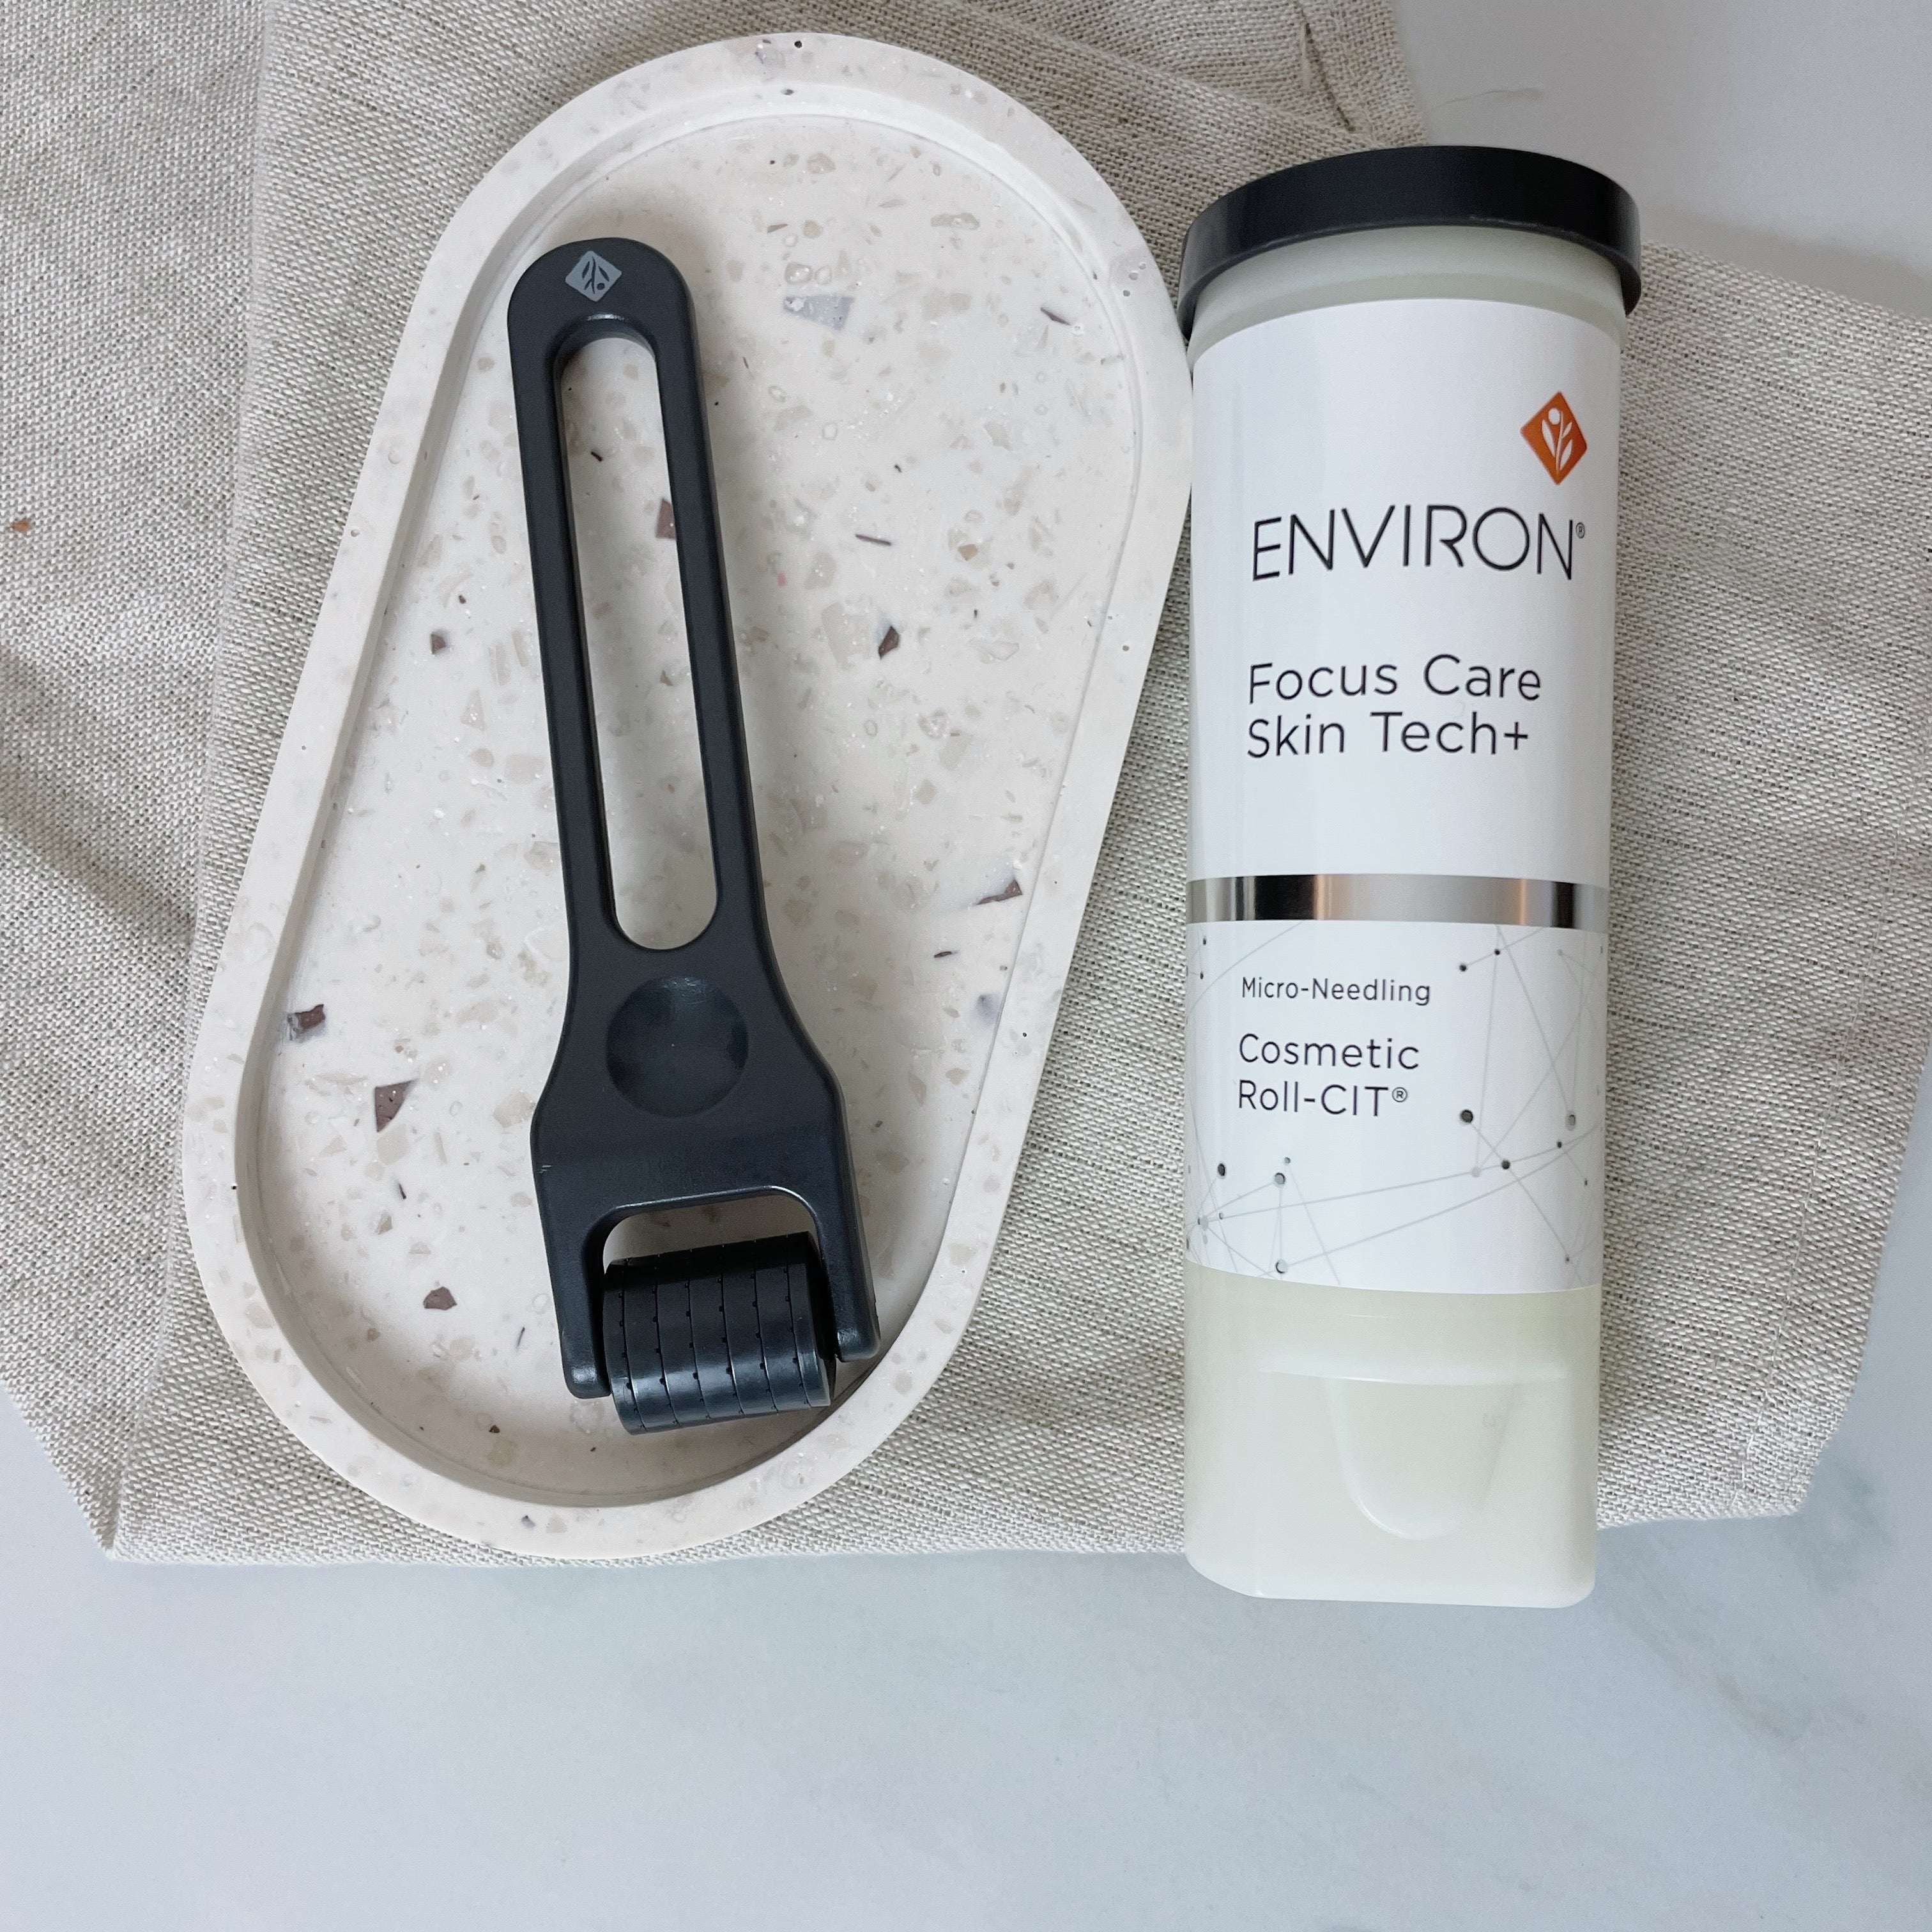 Environ Cosmetic Roll-CIT